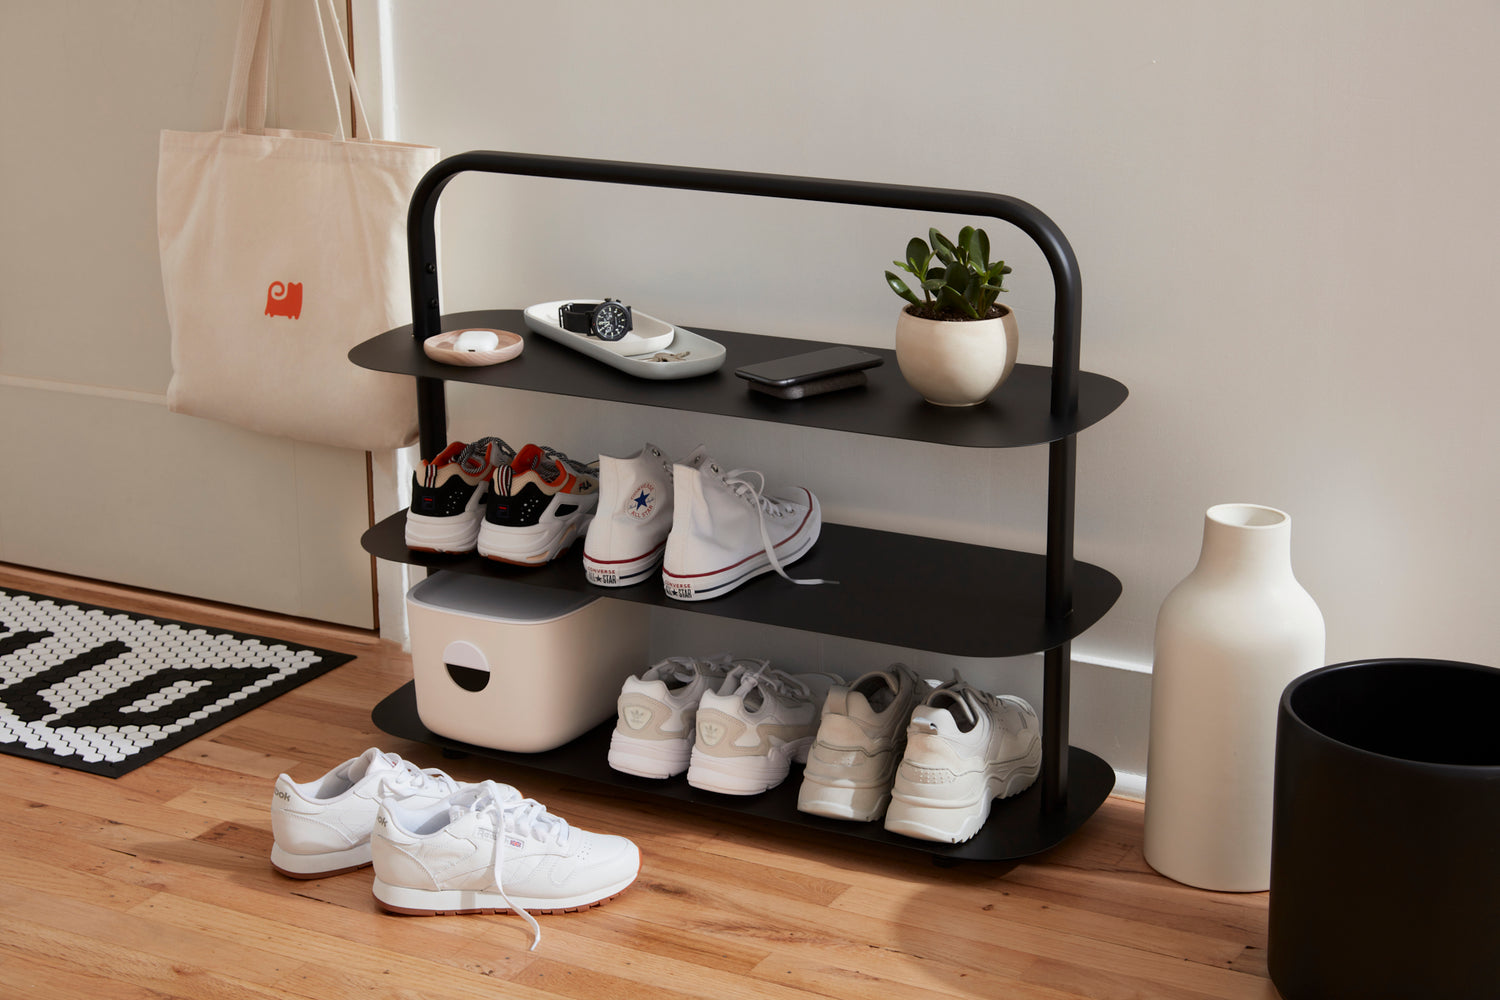 The Black Entryway Rack placed in an entryway with shoes and other Open Spaces products displayed on it.